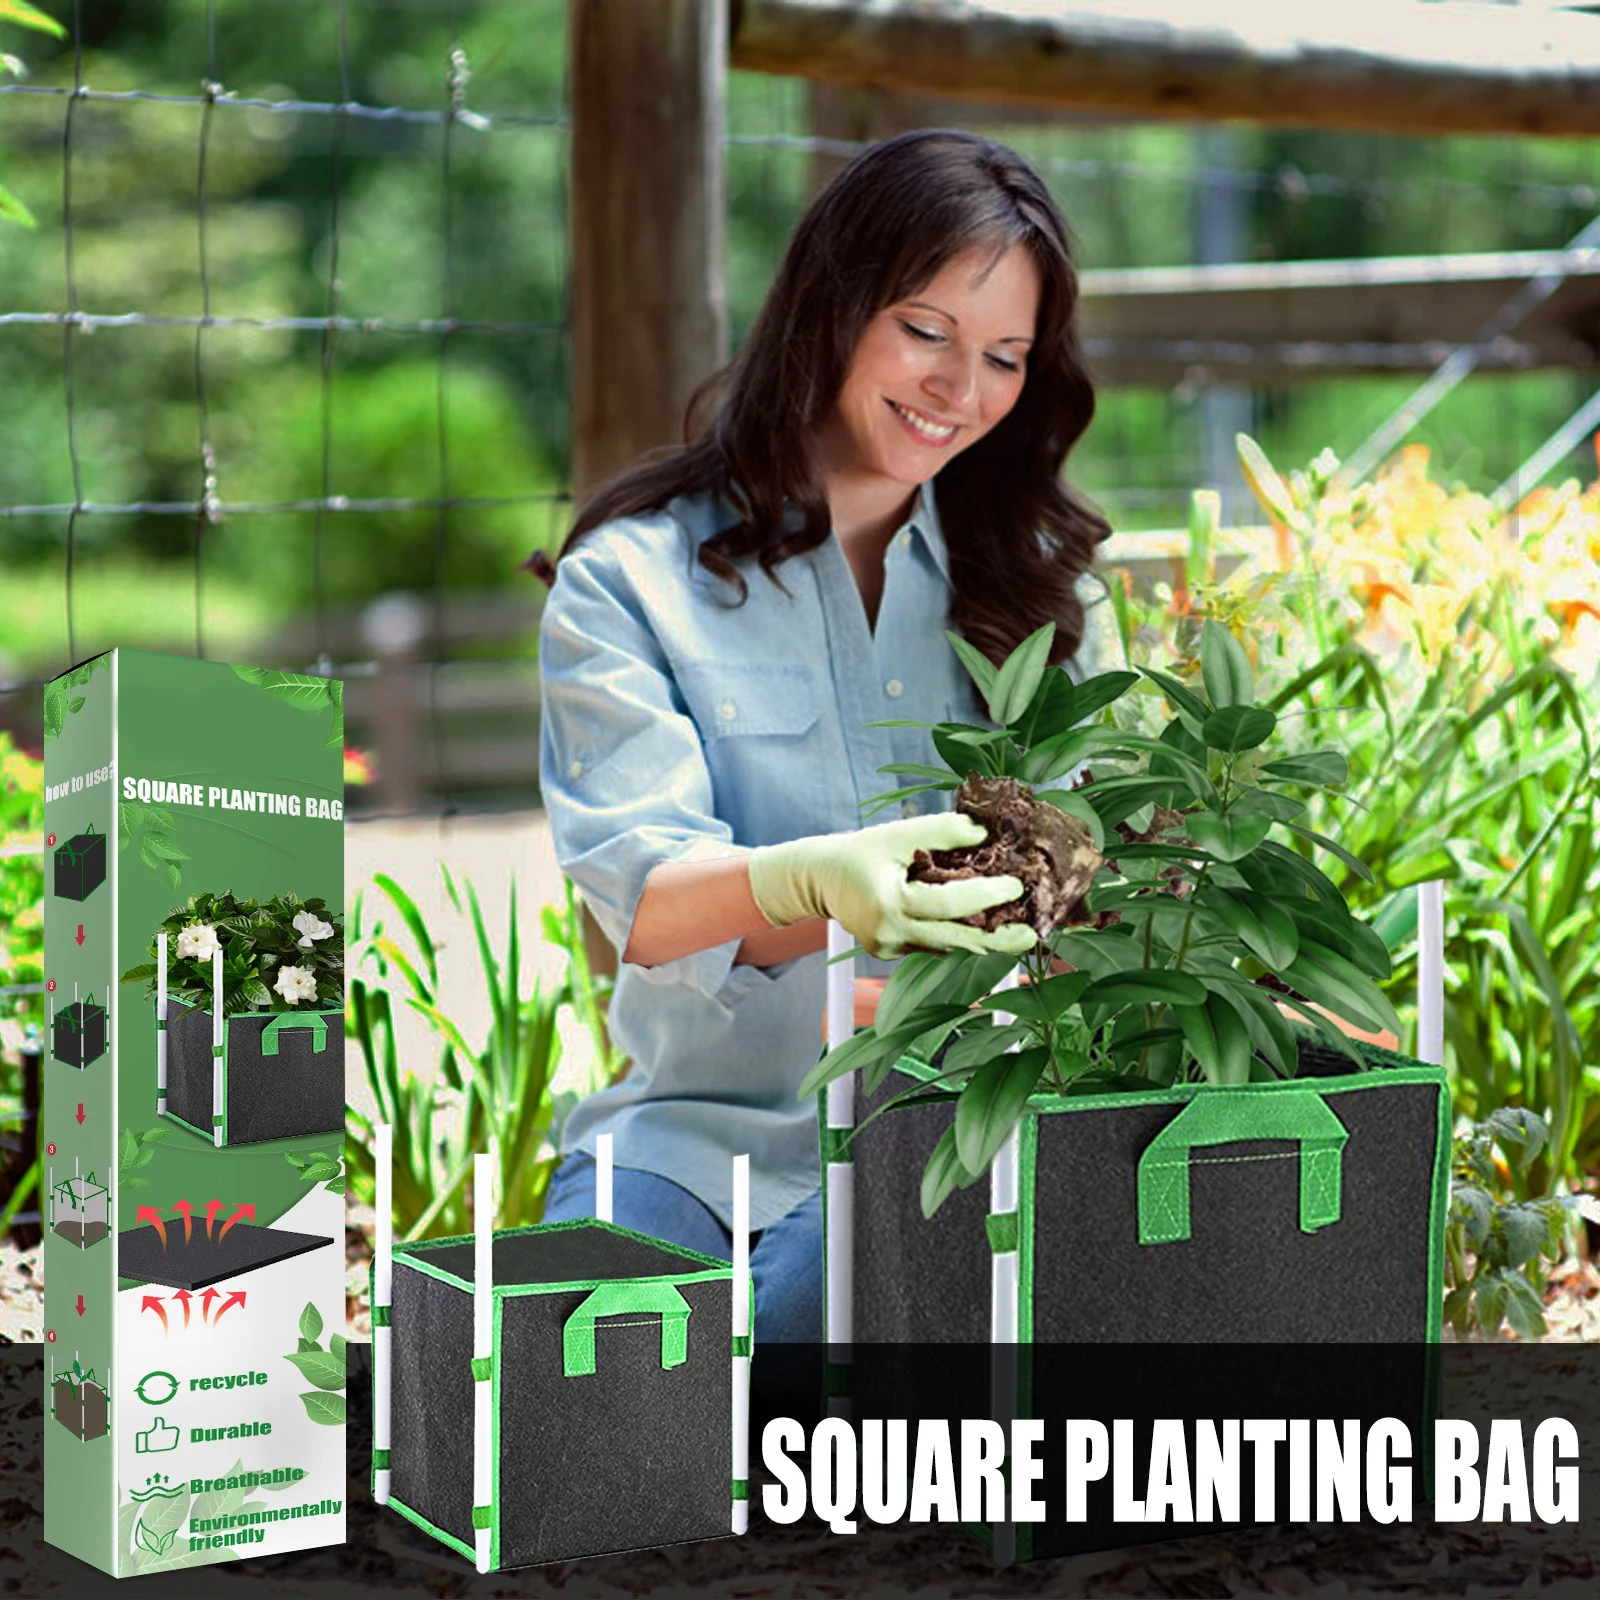 

Square Non-Woven Planting Bag Large Capacity Plant Growing Container Bag for Garden Courtyard Balcony Grow Bags